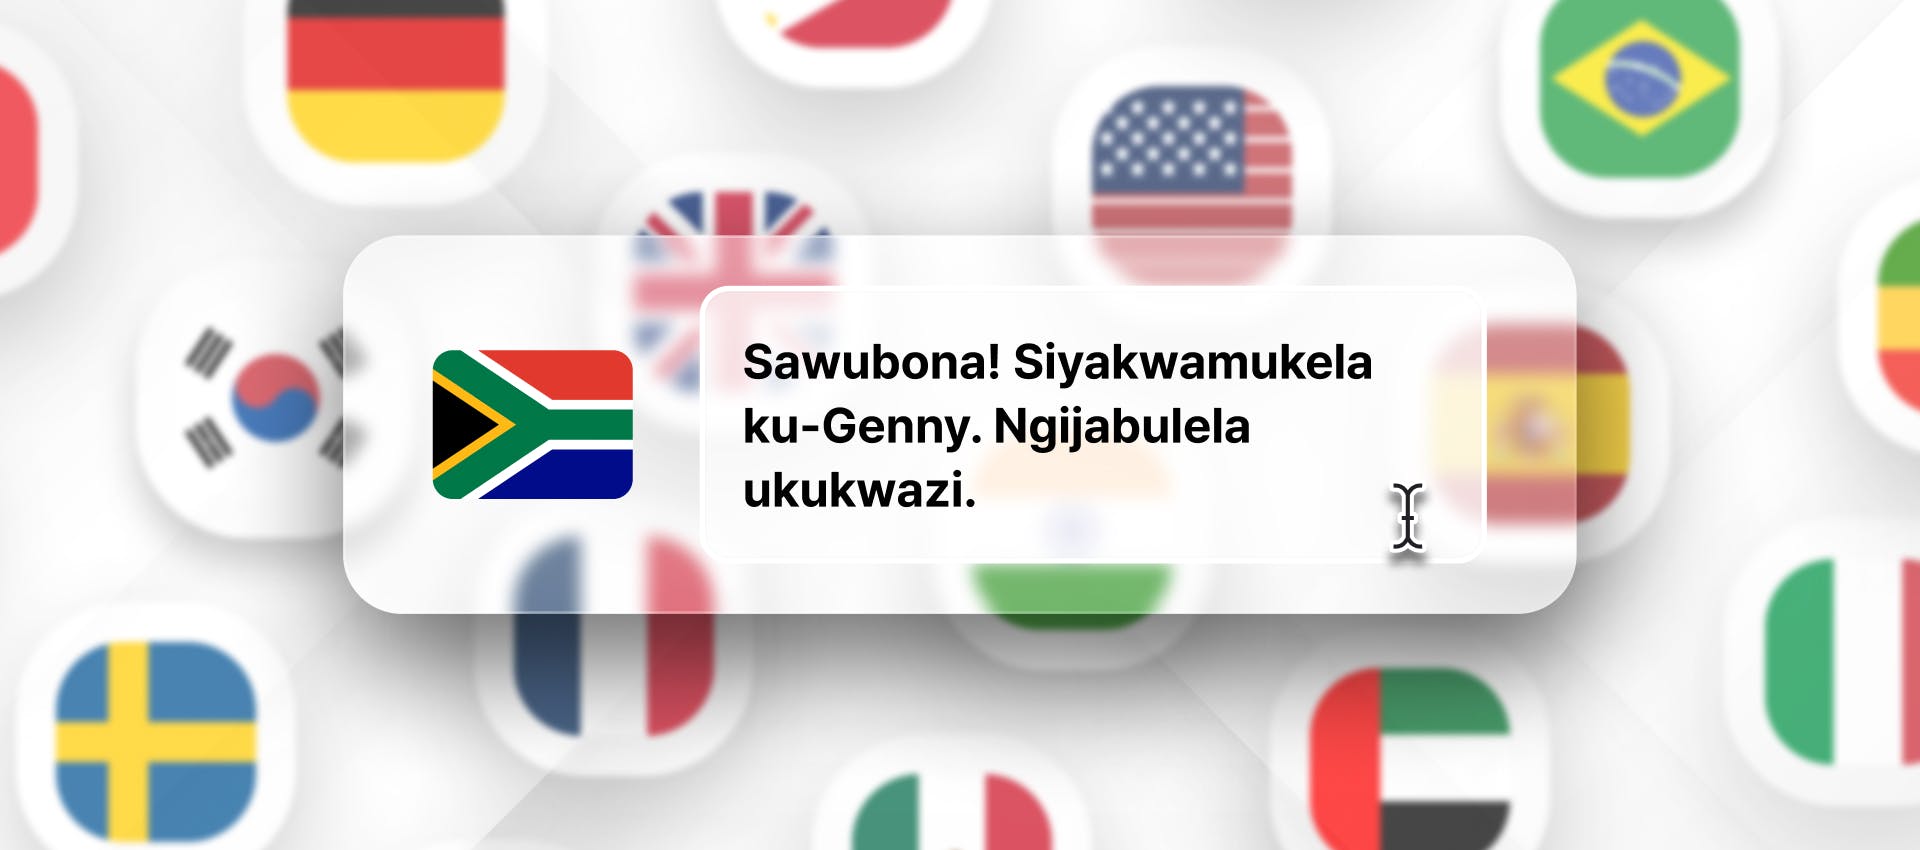 Zulu phrase for Zulu TTS generation with different flags in the background